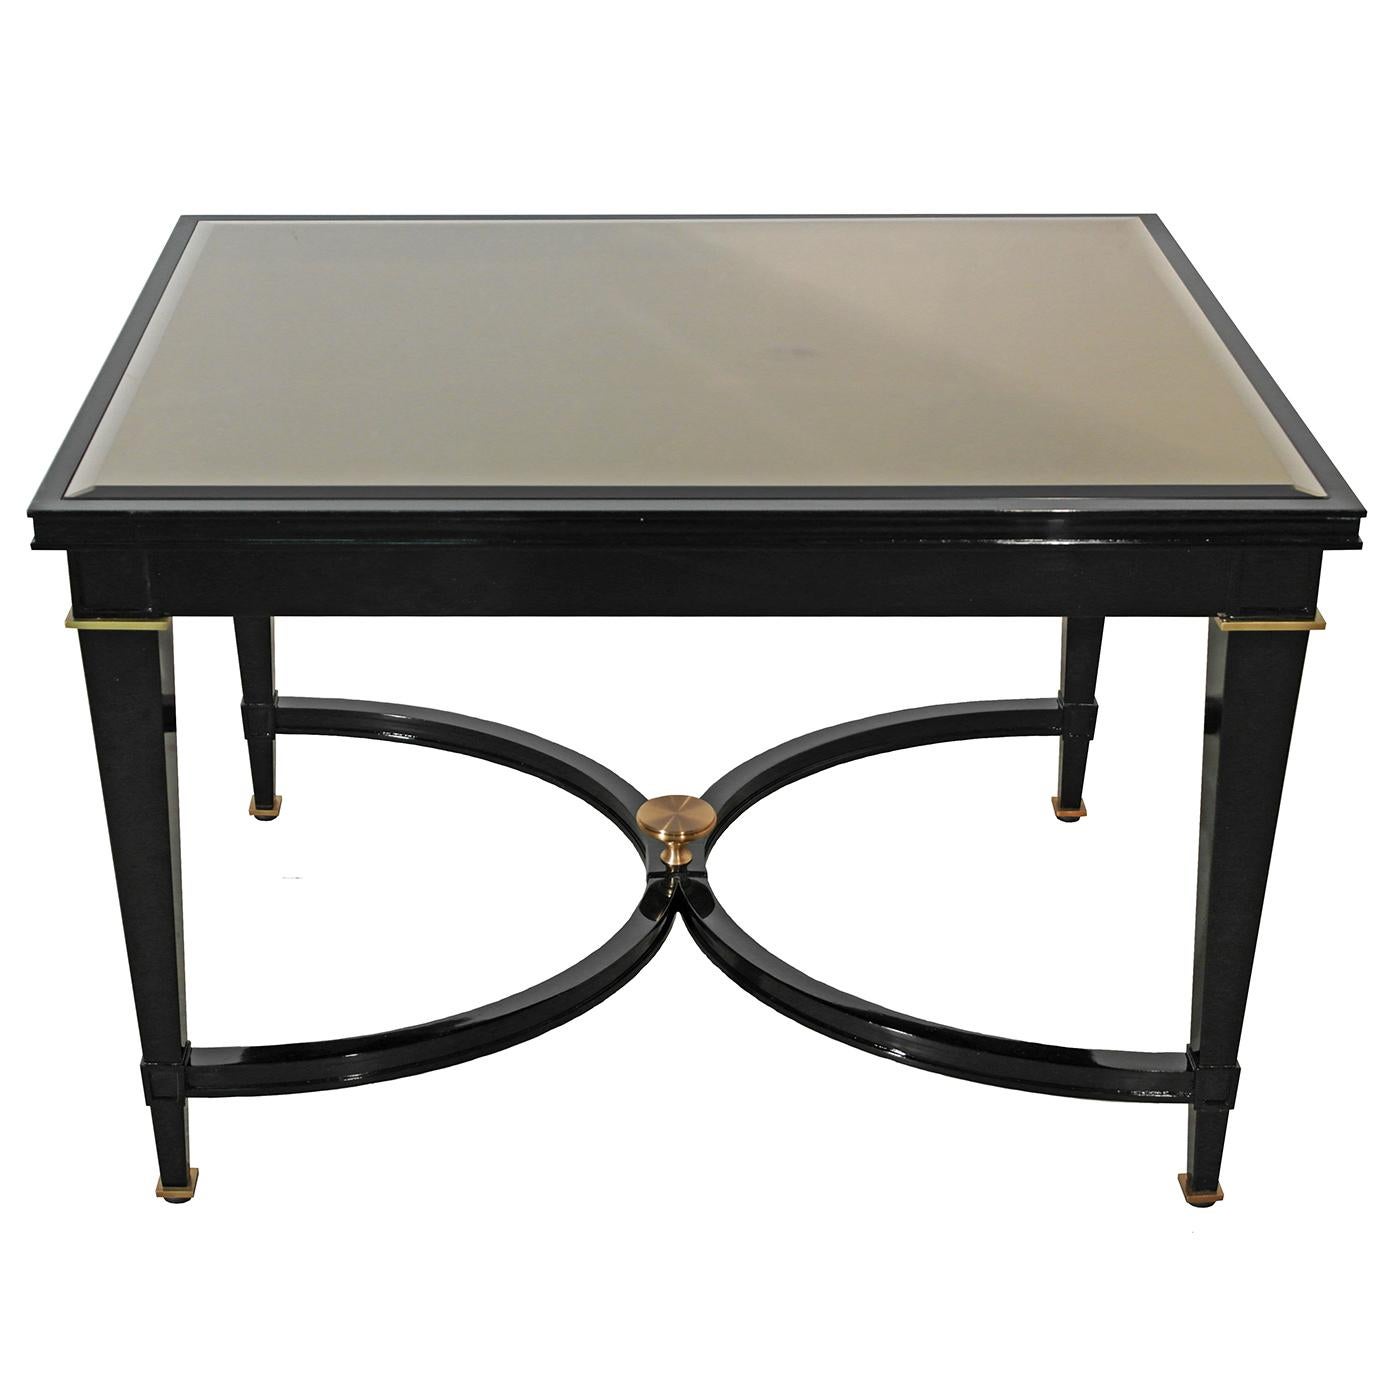 This elegant side table is crafted from solid wood, boasting a glossy black lacquered finish. Featuring tapered legs and two semi-circular base details, the design is enhanced with brass accents, characterized by a light brushed bronze finish.